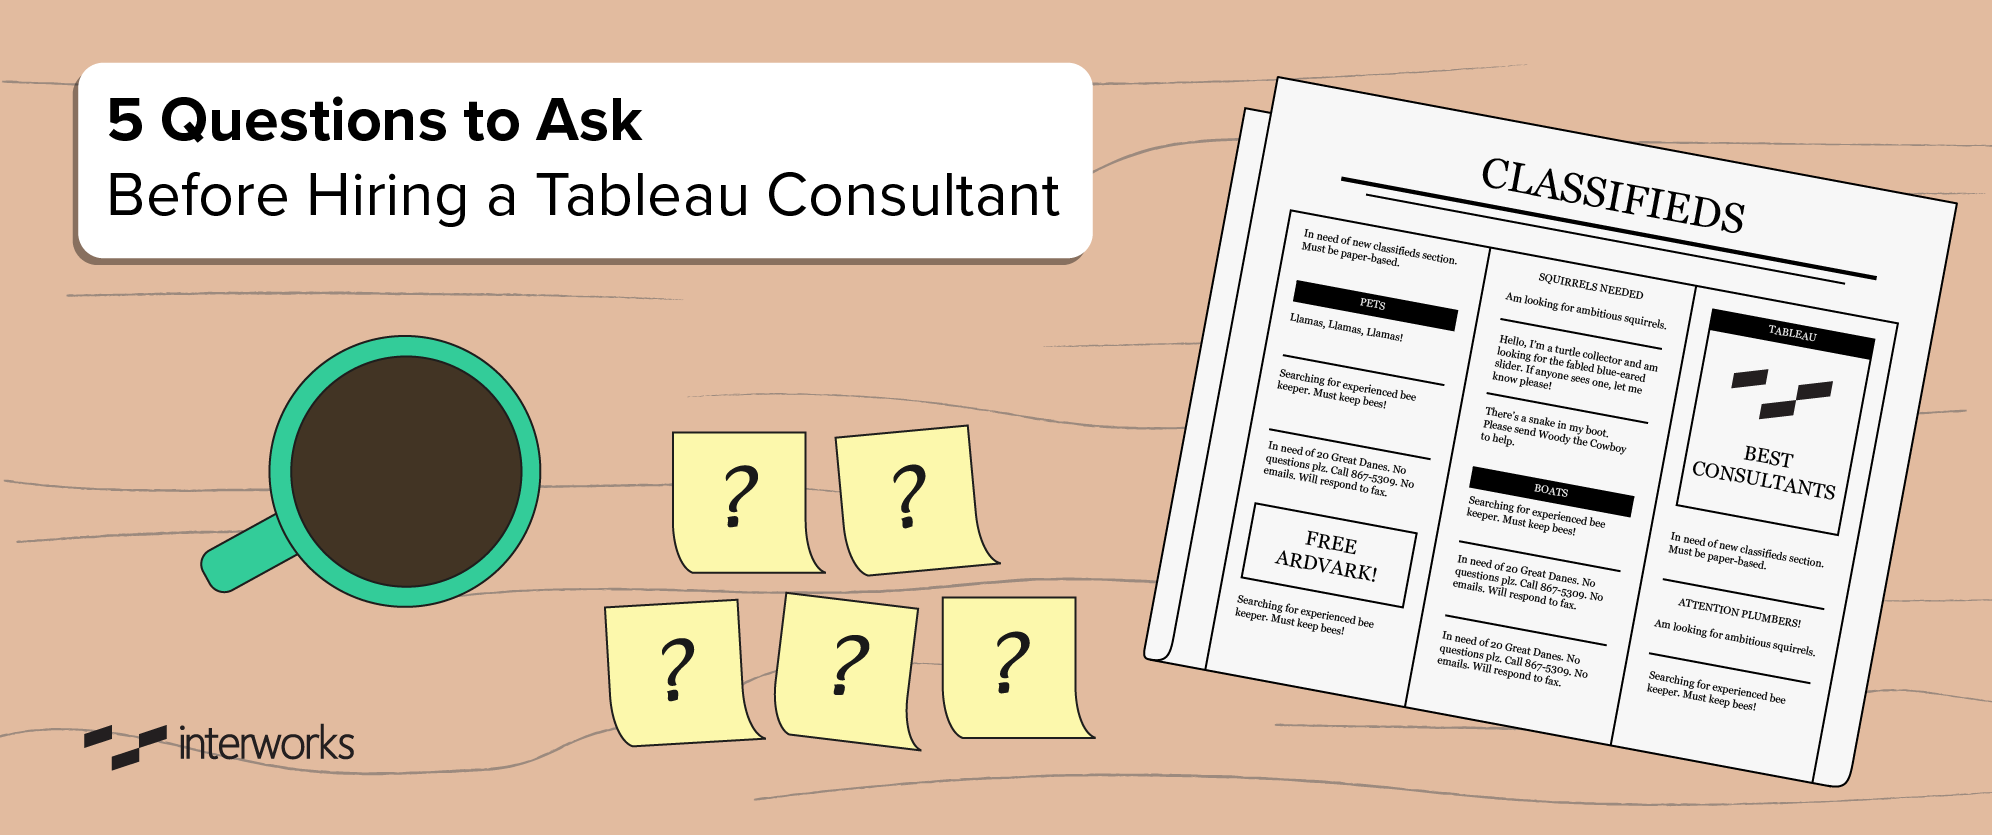 5 Questions to Ask Before Hiring a Tableau Consultant